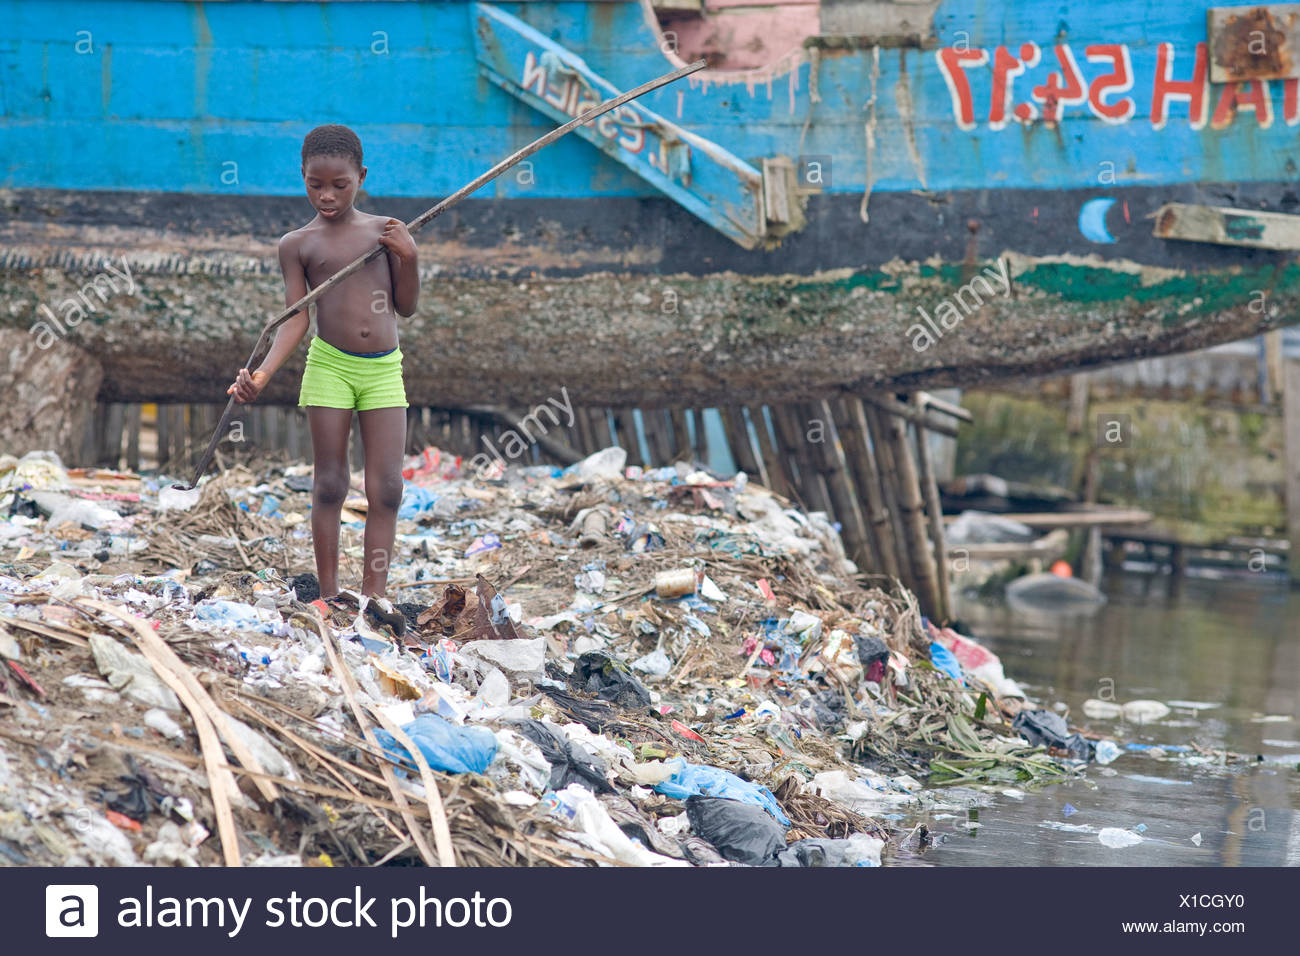 life-in-the-monrovian-fishing-community-of-west-point-in-liberia-X1CGY0.jpg